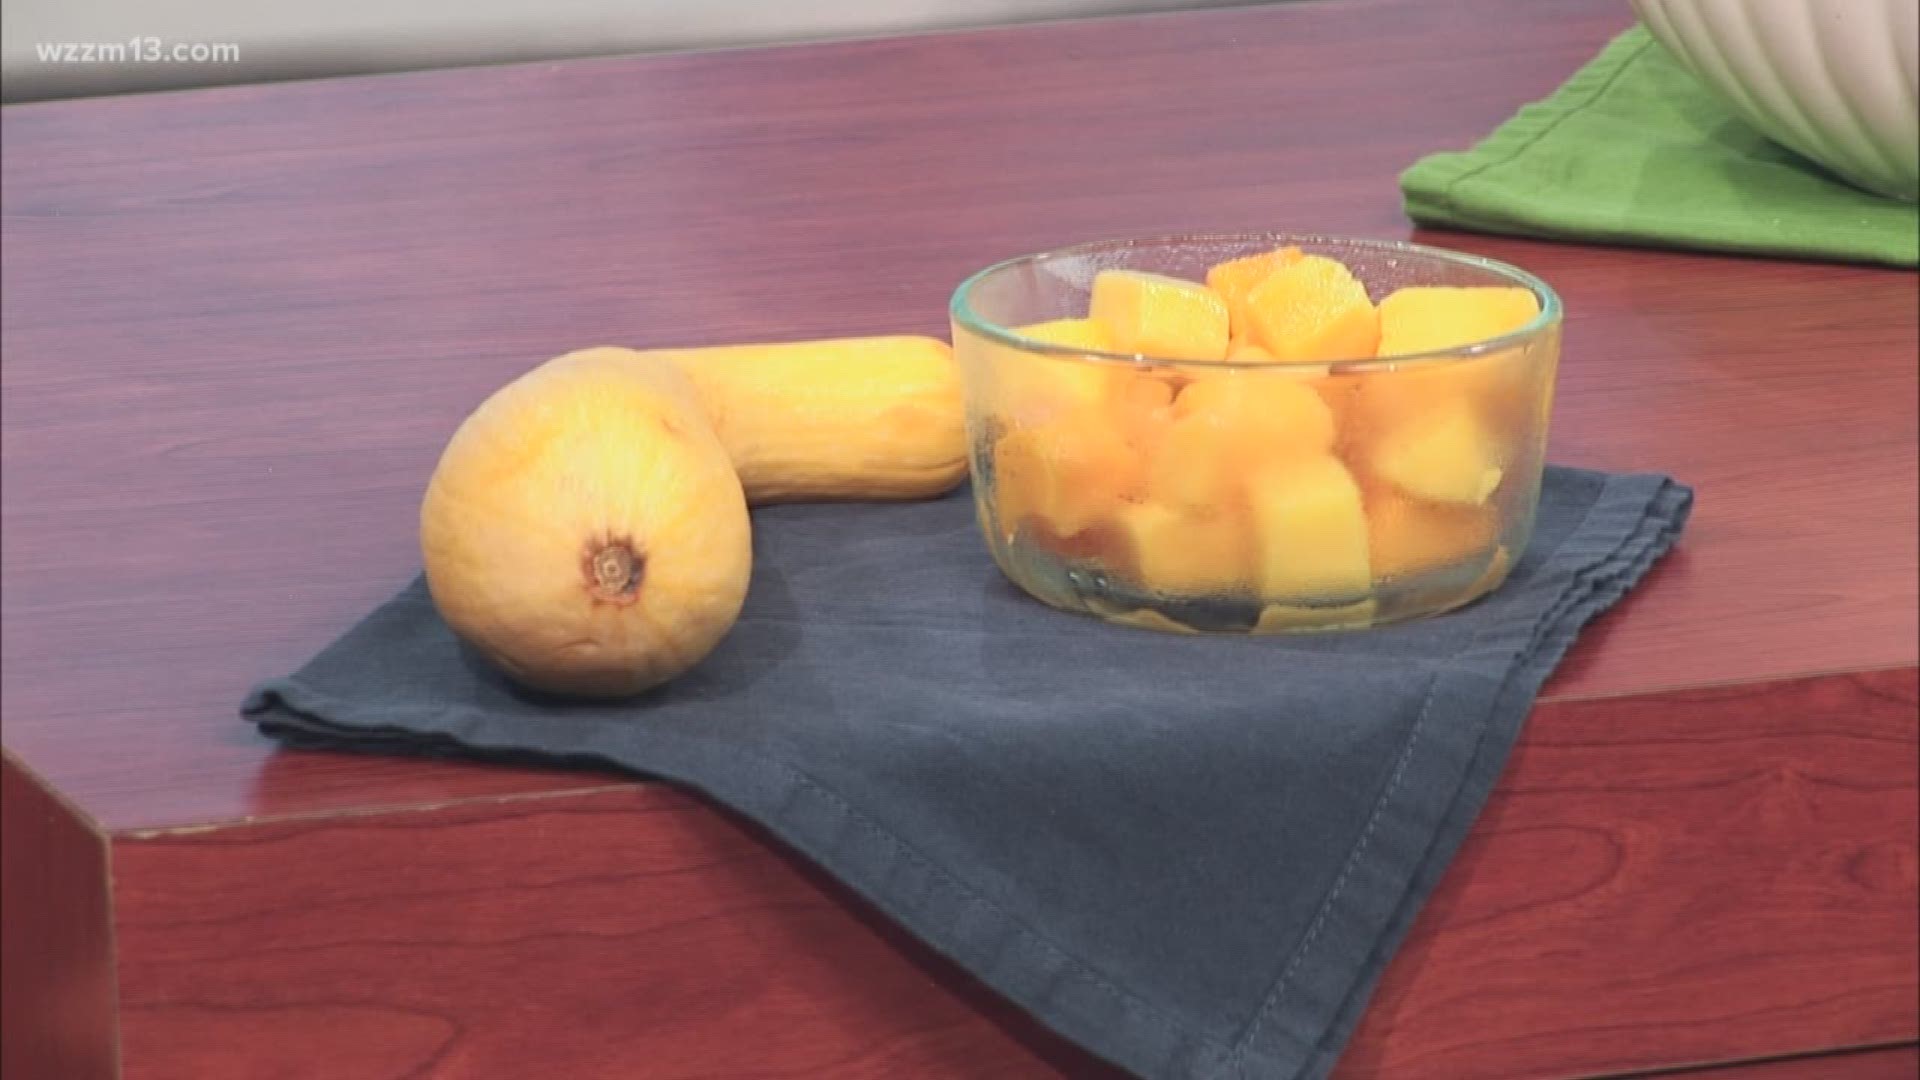 Registered Dietitian Amy Bragagnini joined health reporter Val Lego to talk about Mercy's public even that showcases healthy food that help to reduce cancer risk, as well as some nutrition tips for cancer survivors.